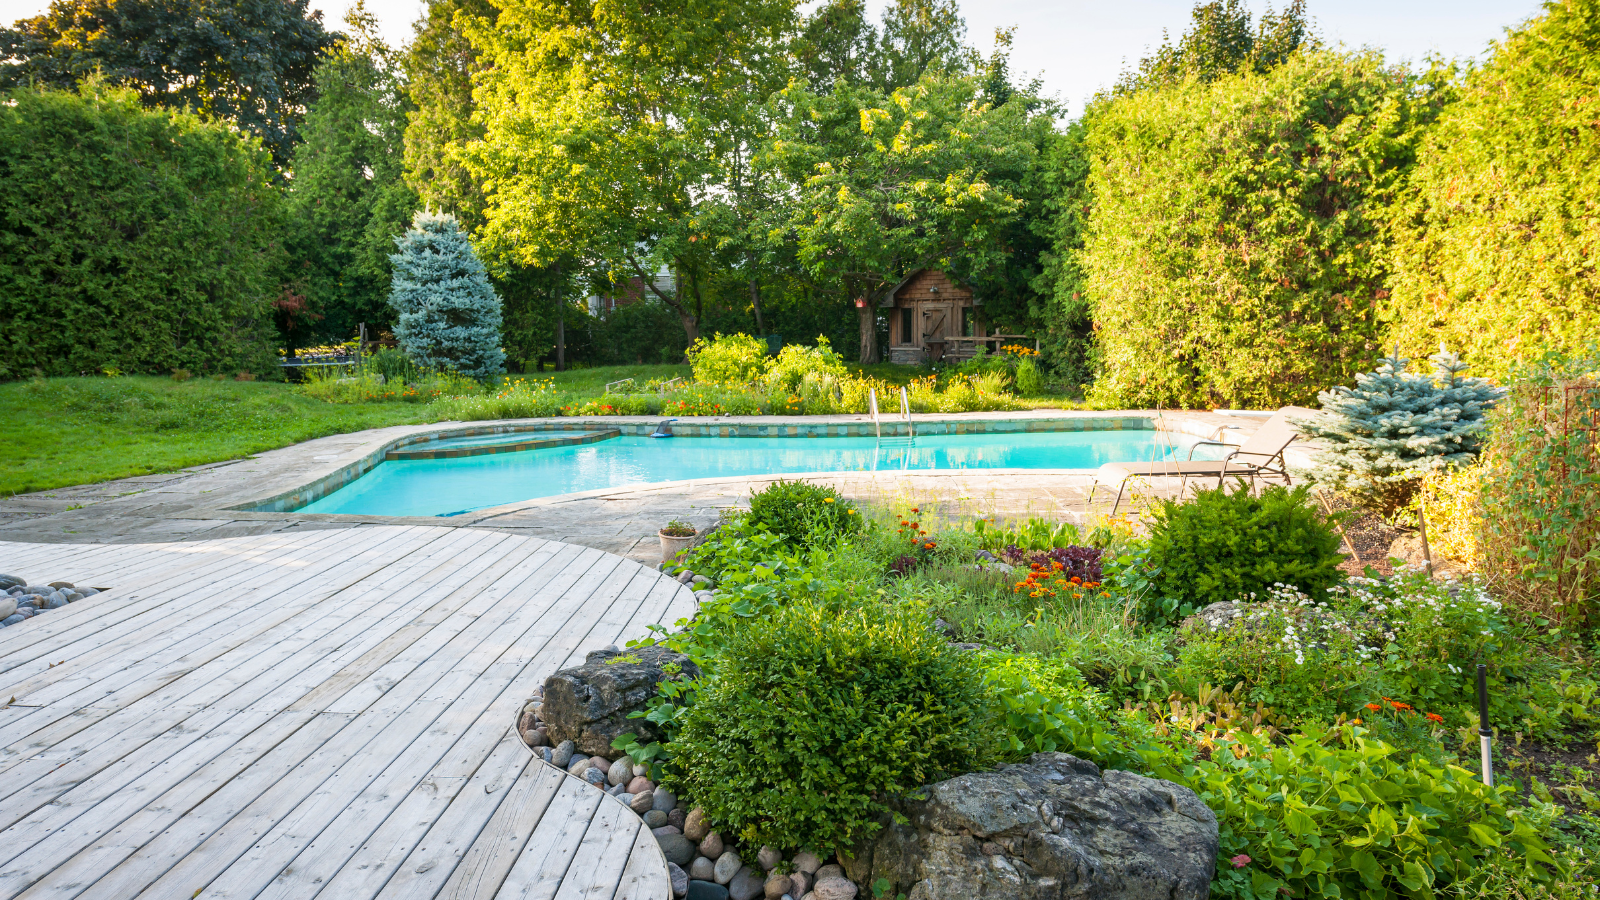 How can I integrate a pool in my garden without compromising the design - bighomeprojects.com